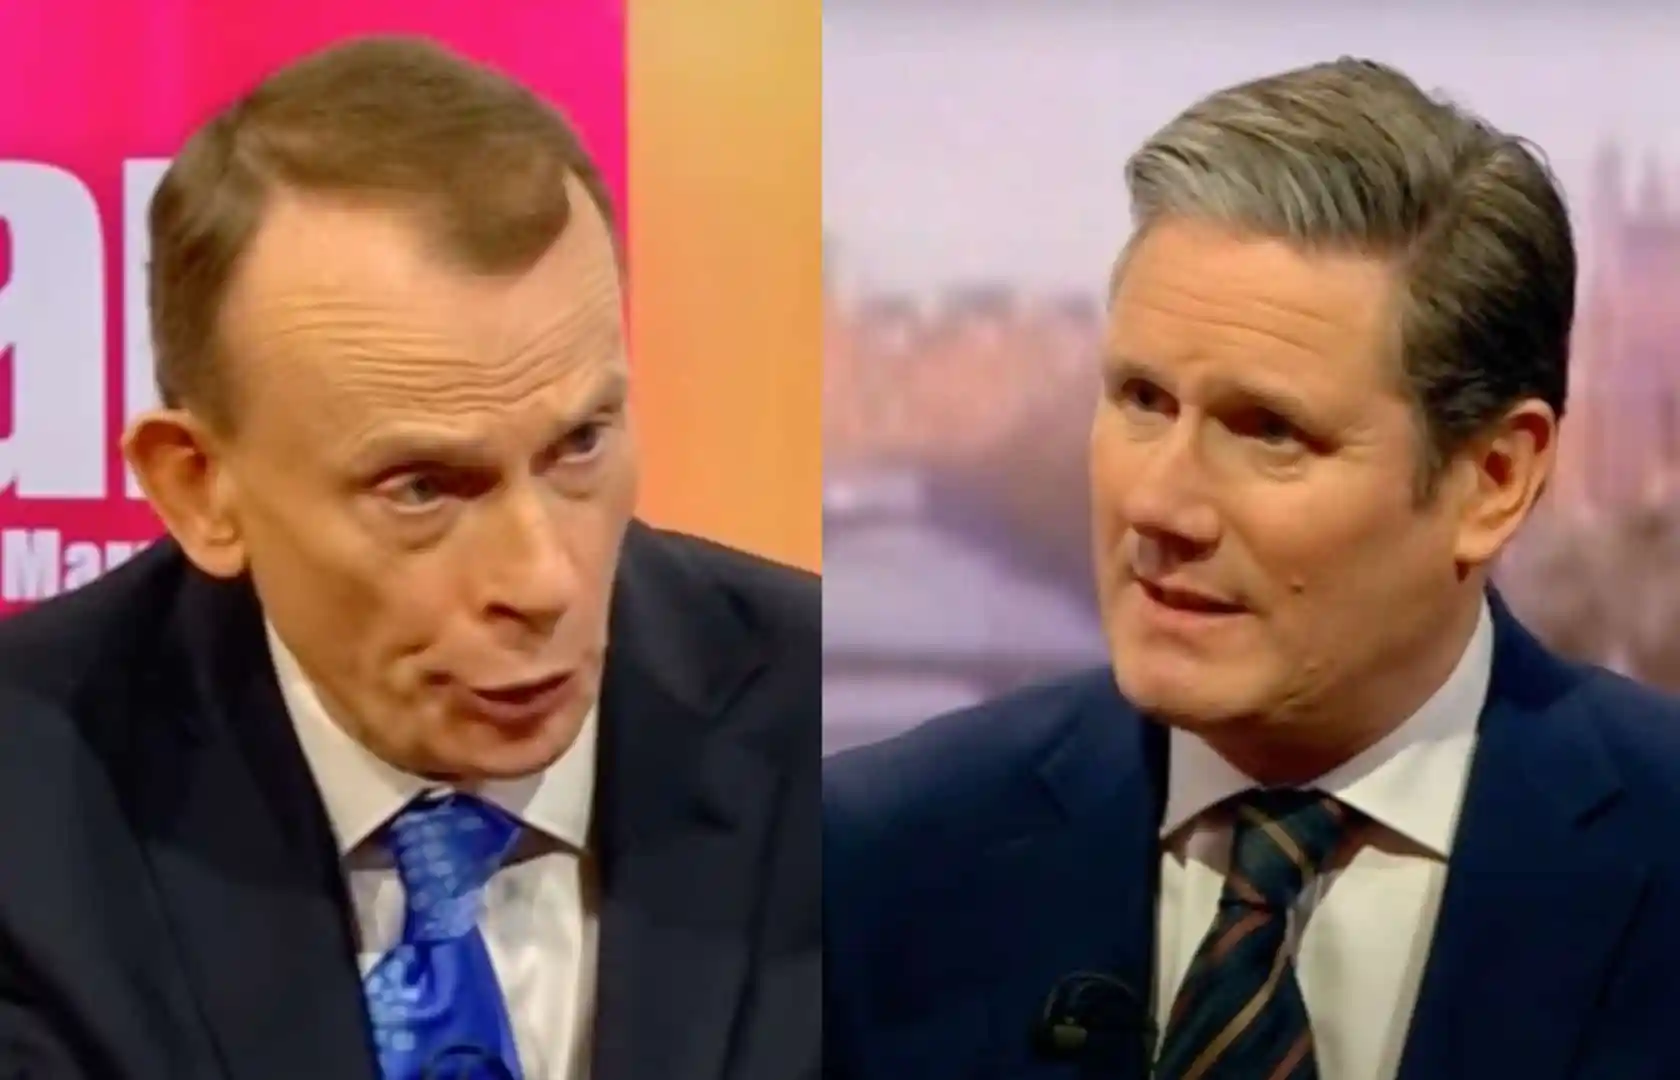 Andrew Marr interviewing Keir Starmer on BBC 1